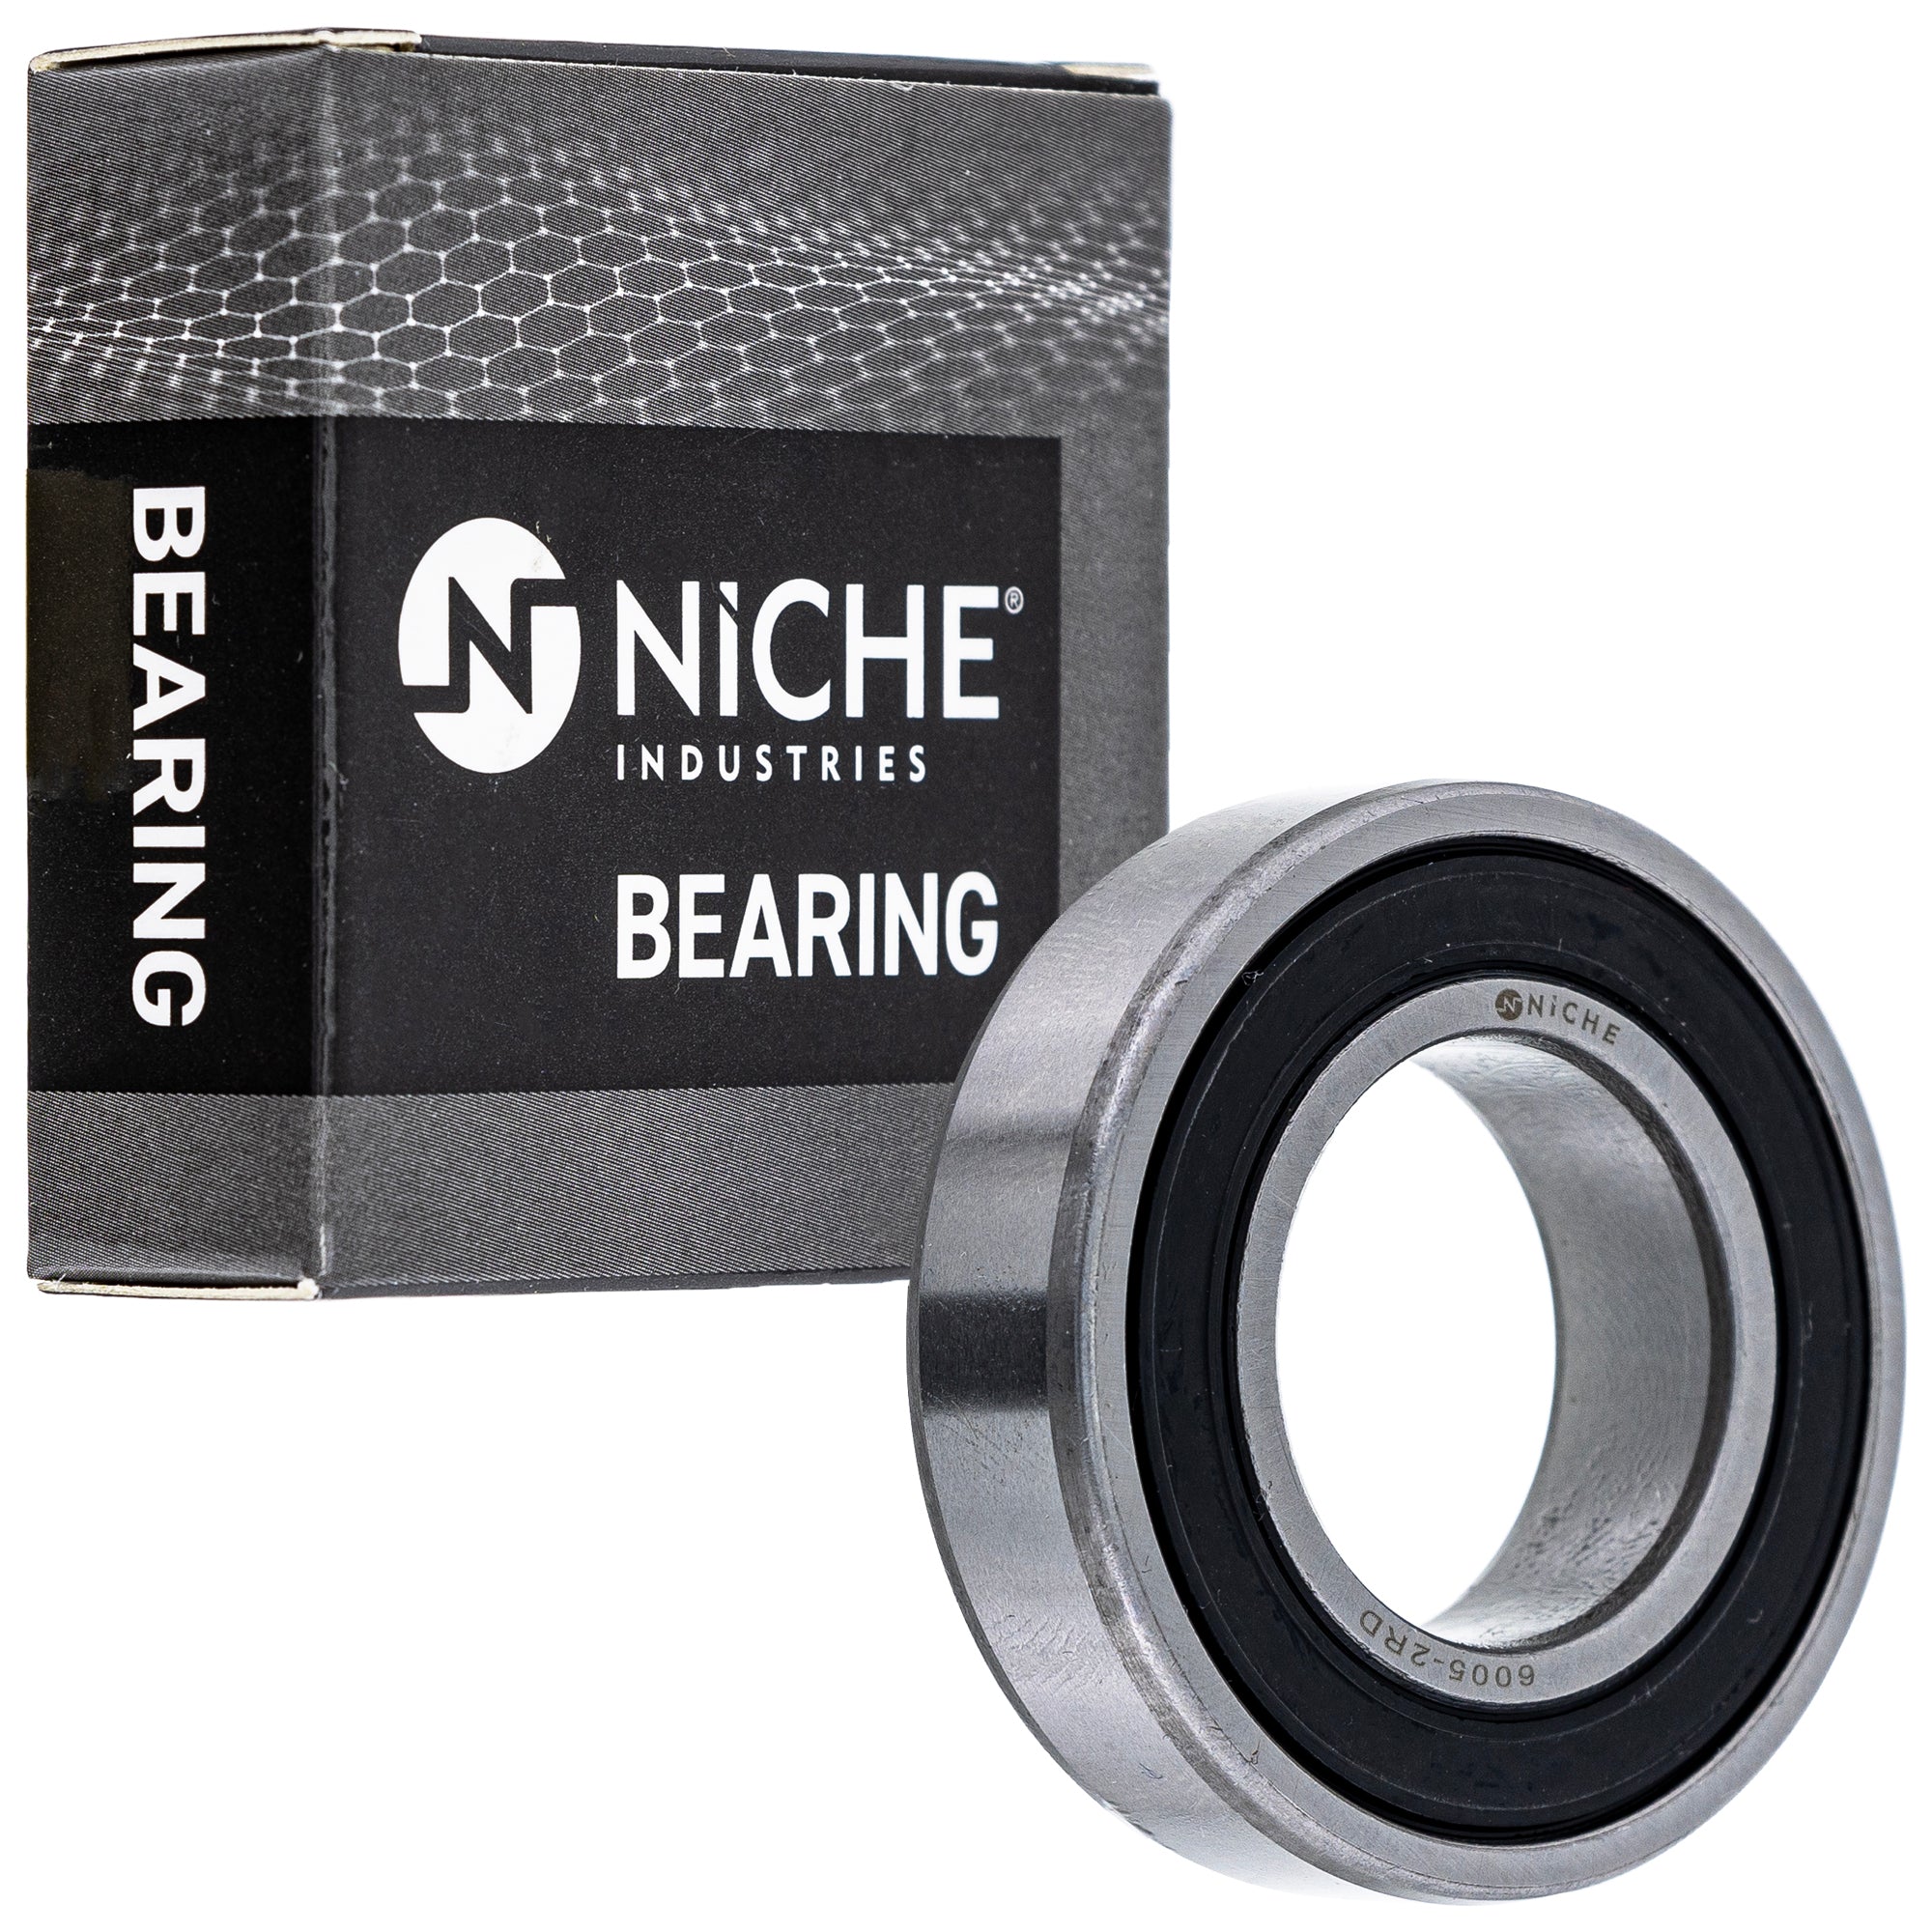 NICHE 519-CBB2339R Bearing & Seal Kit 2-Pack for zOTHER RVT1000R RC51